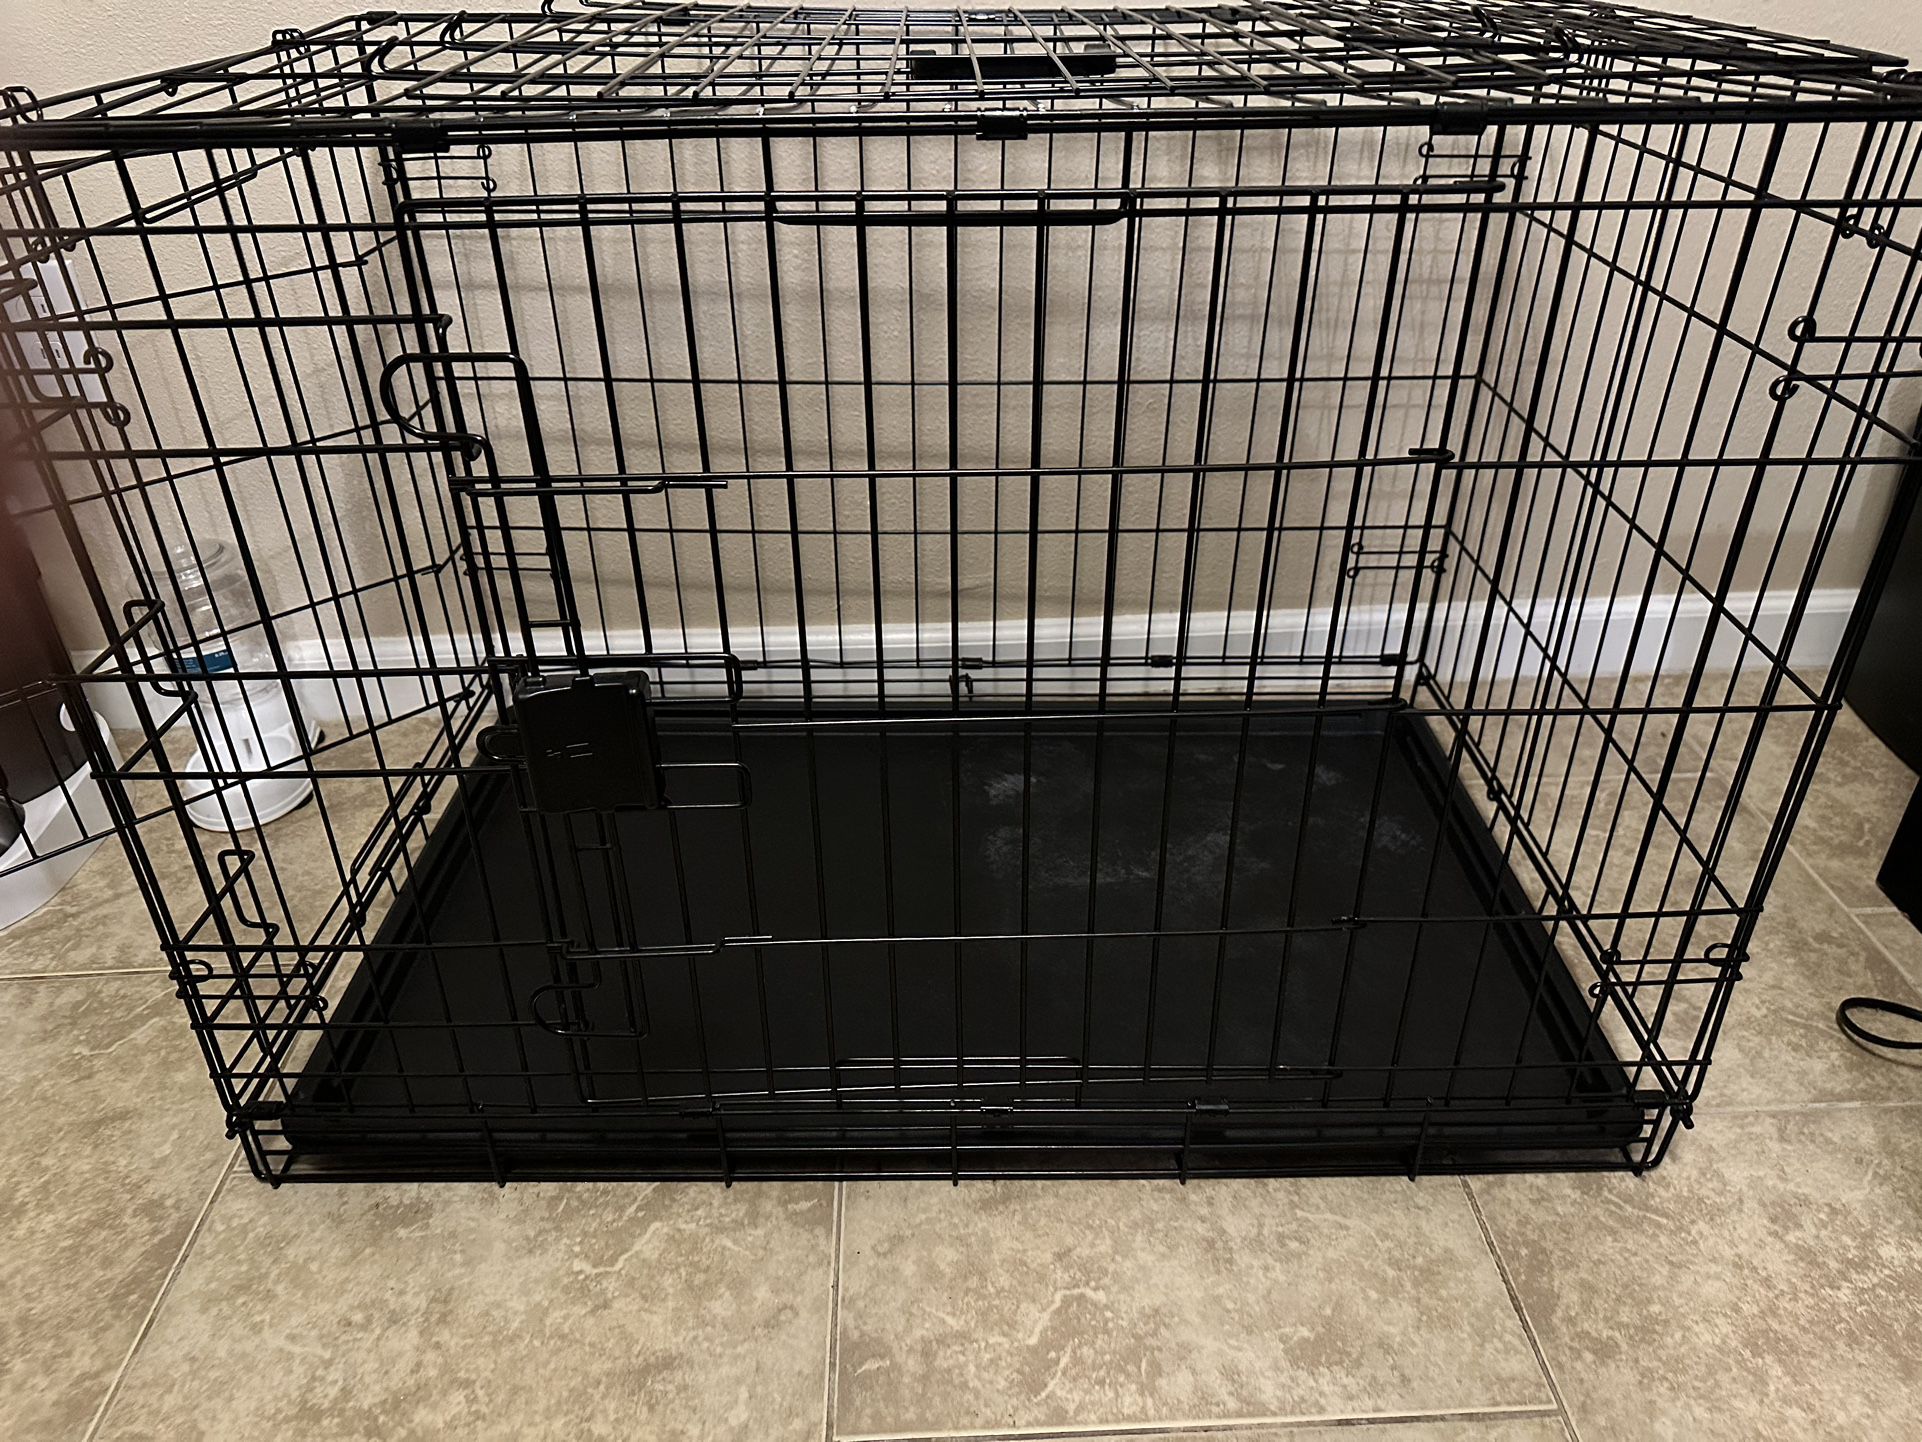 Dog Crate Double Door, 36 x 23 x 25 Inches, Black. *** Like New 